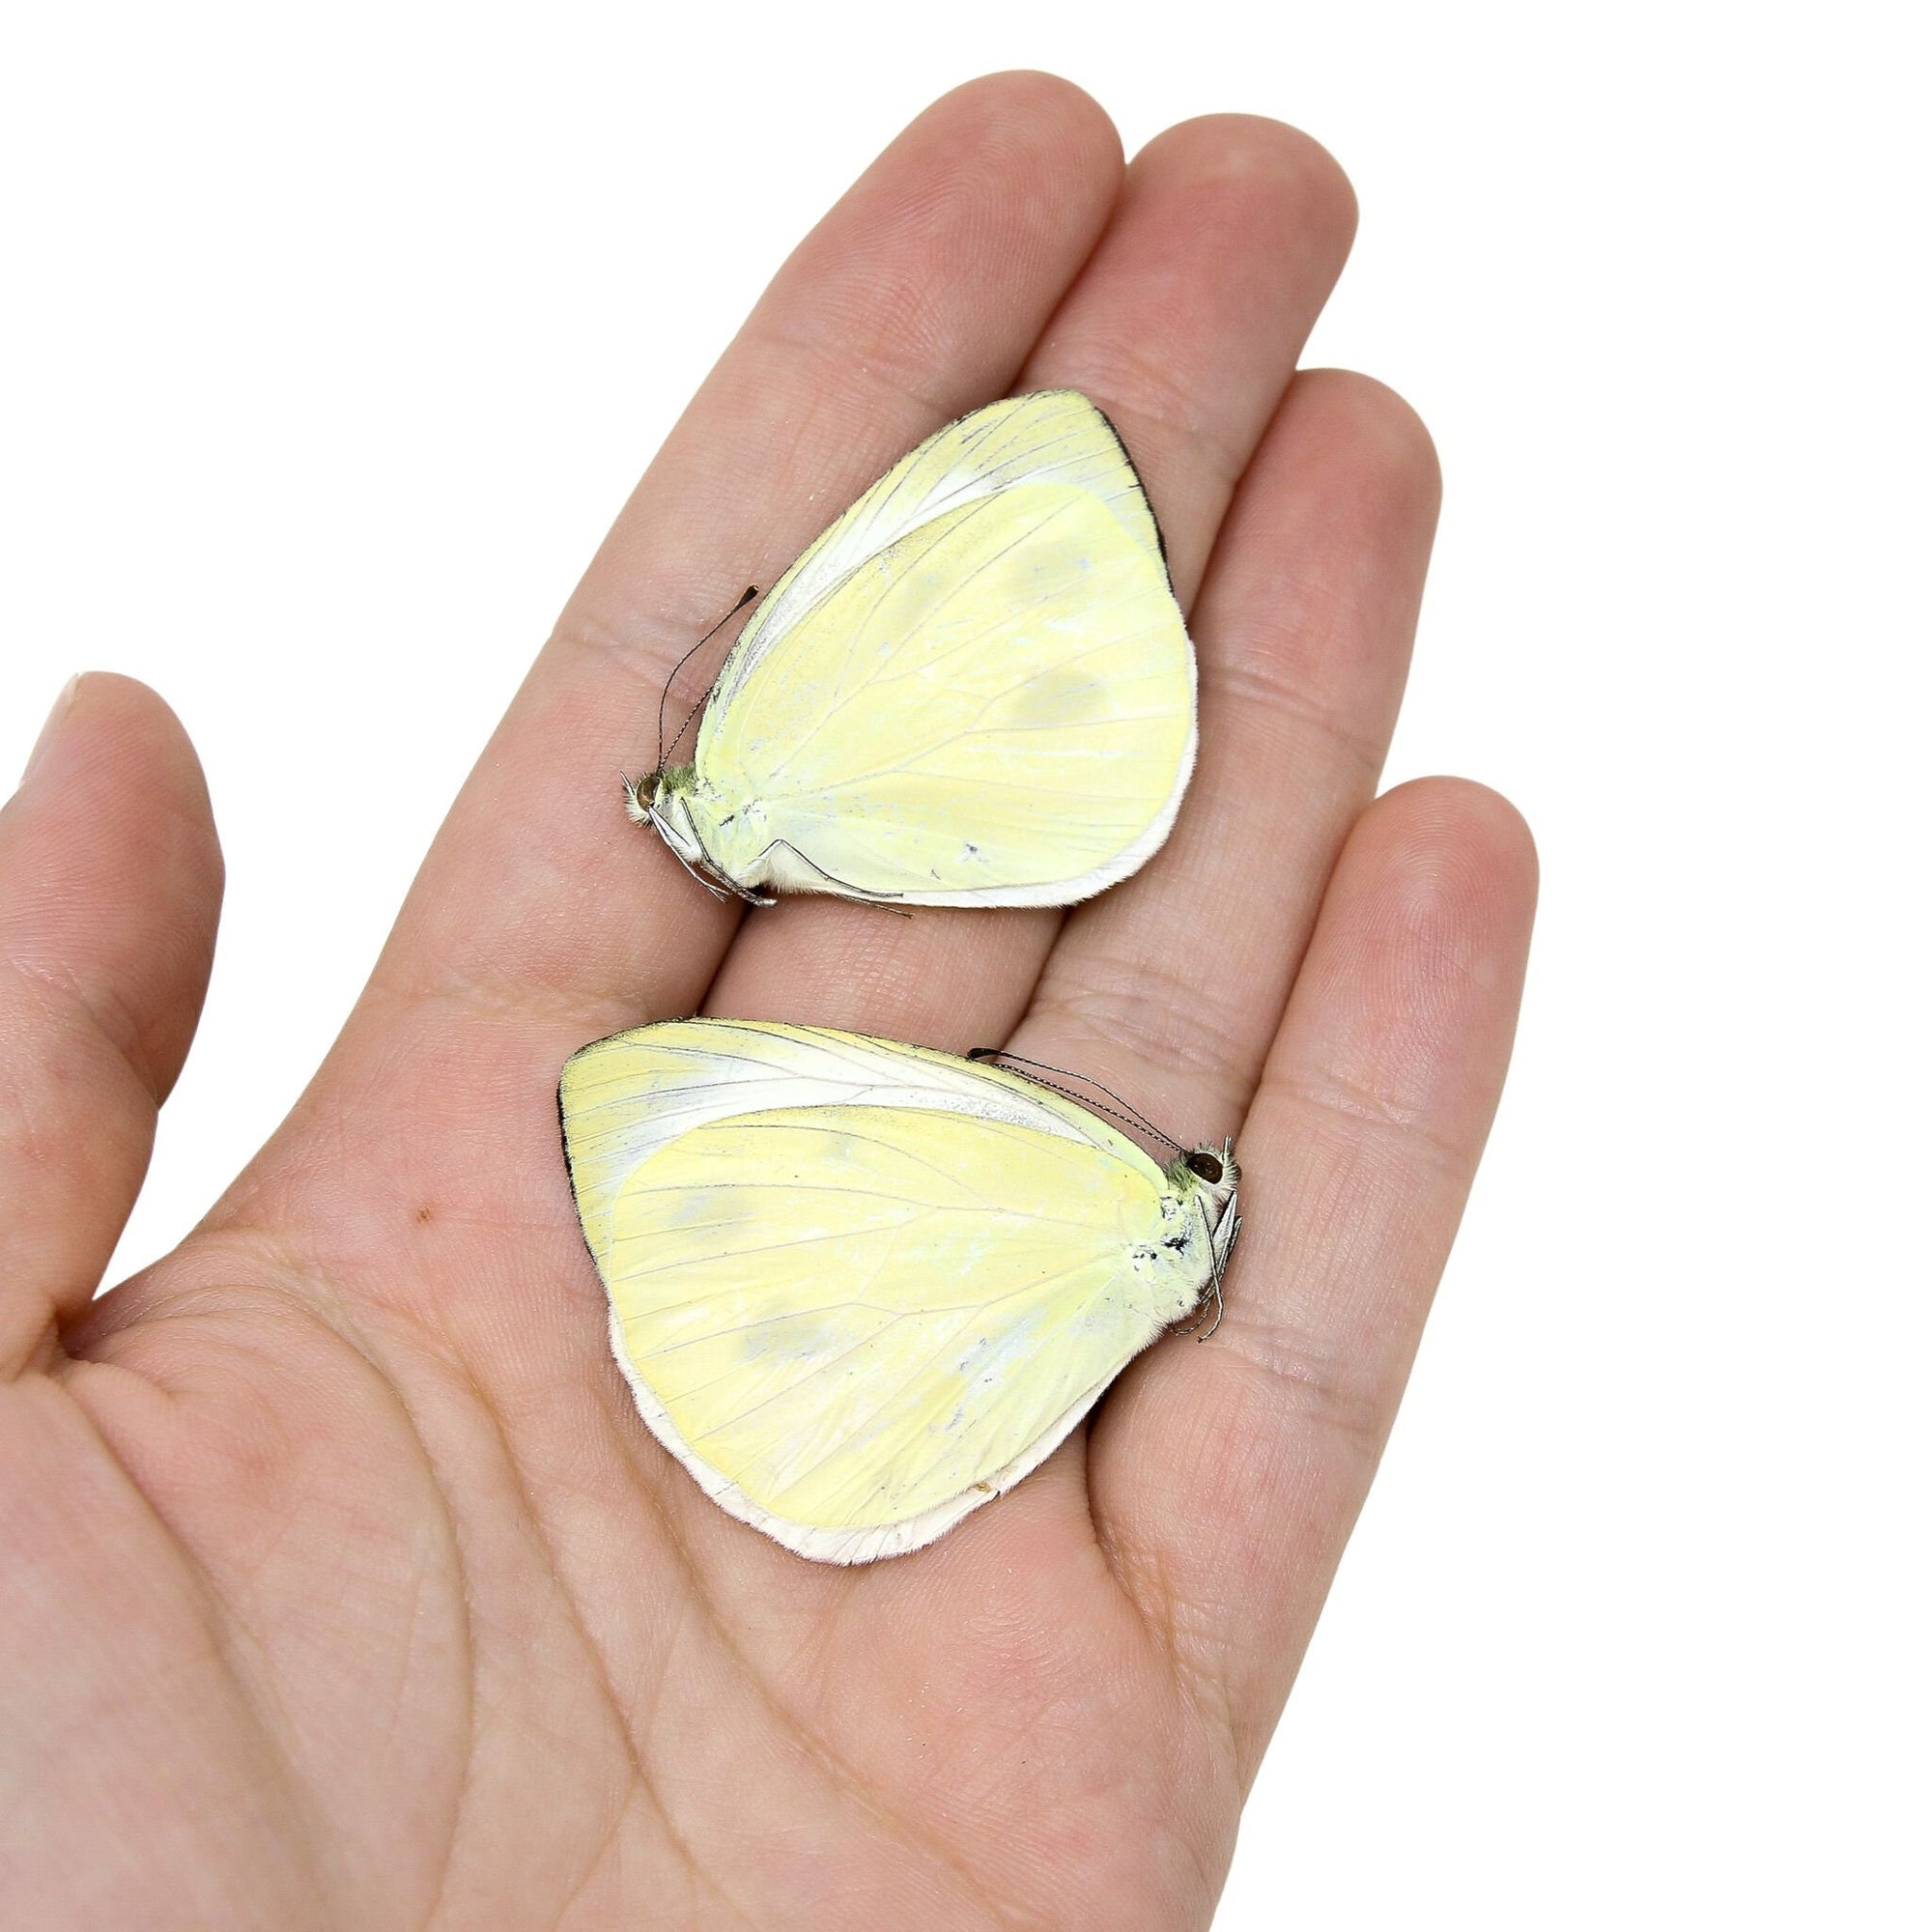 Two (2) Pieris candia, WHITE Butterflies, A1 Real Dry-Preserved Butterflies, Unmounted Entomology Taxidermy Specimens